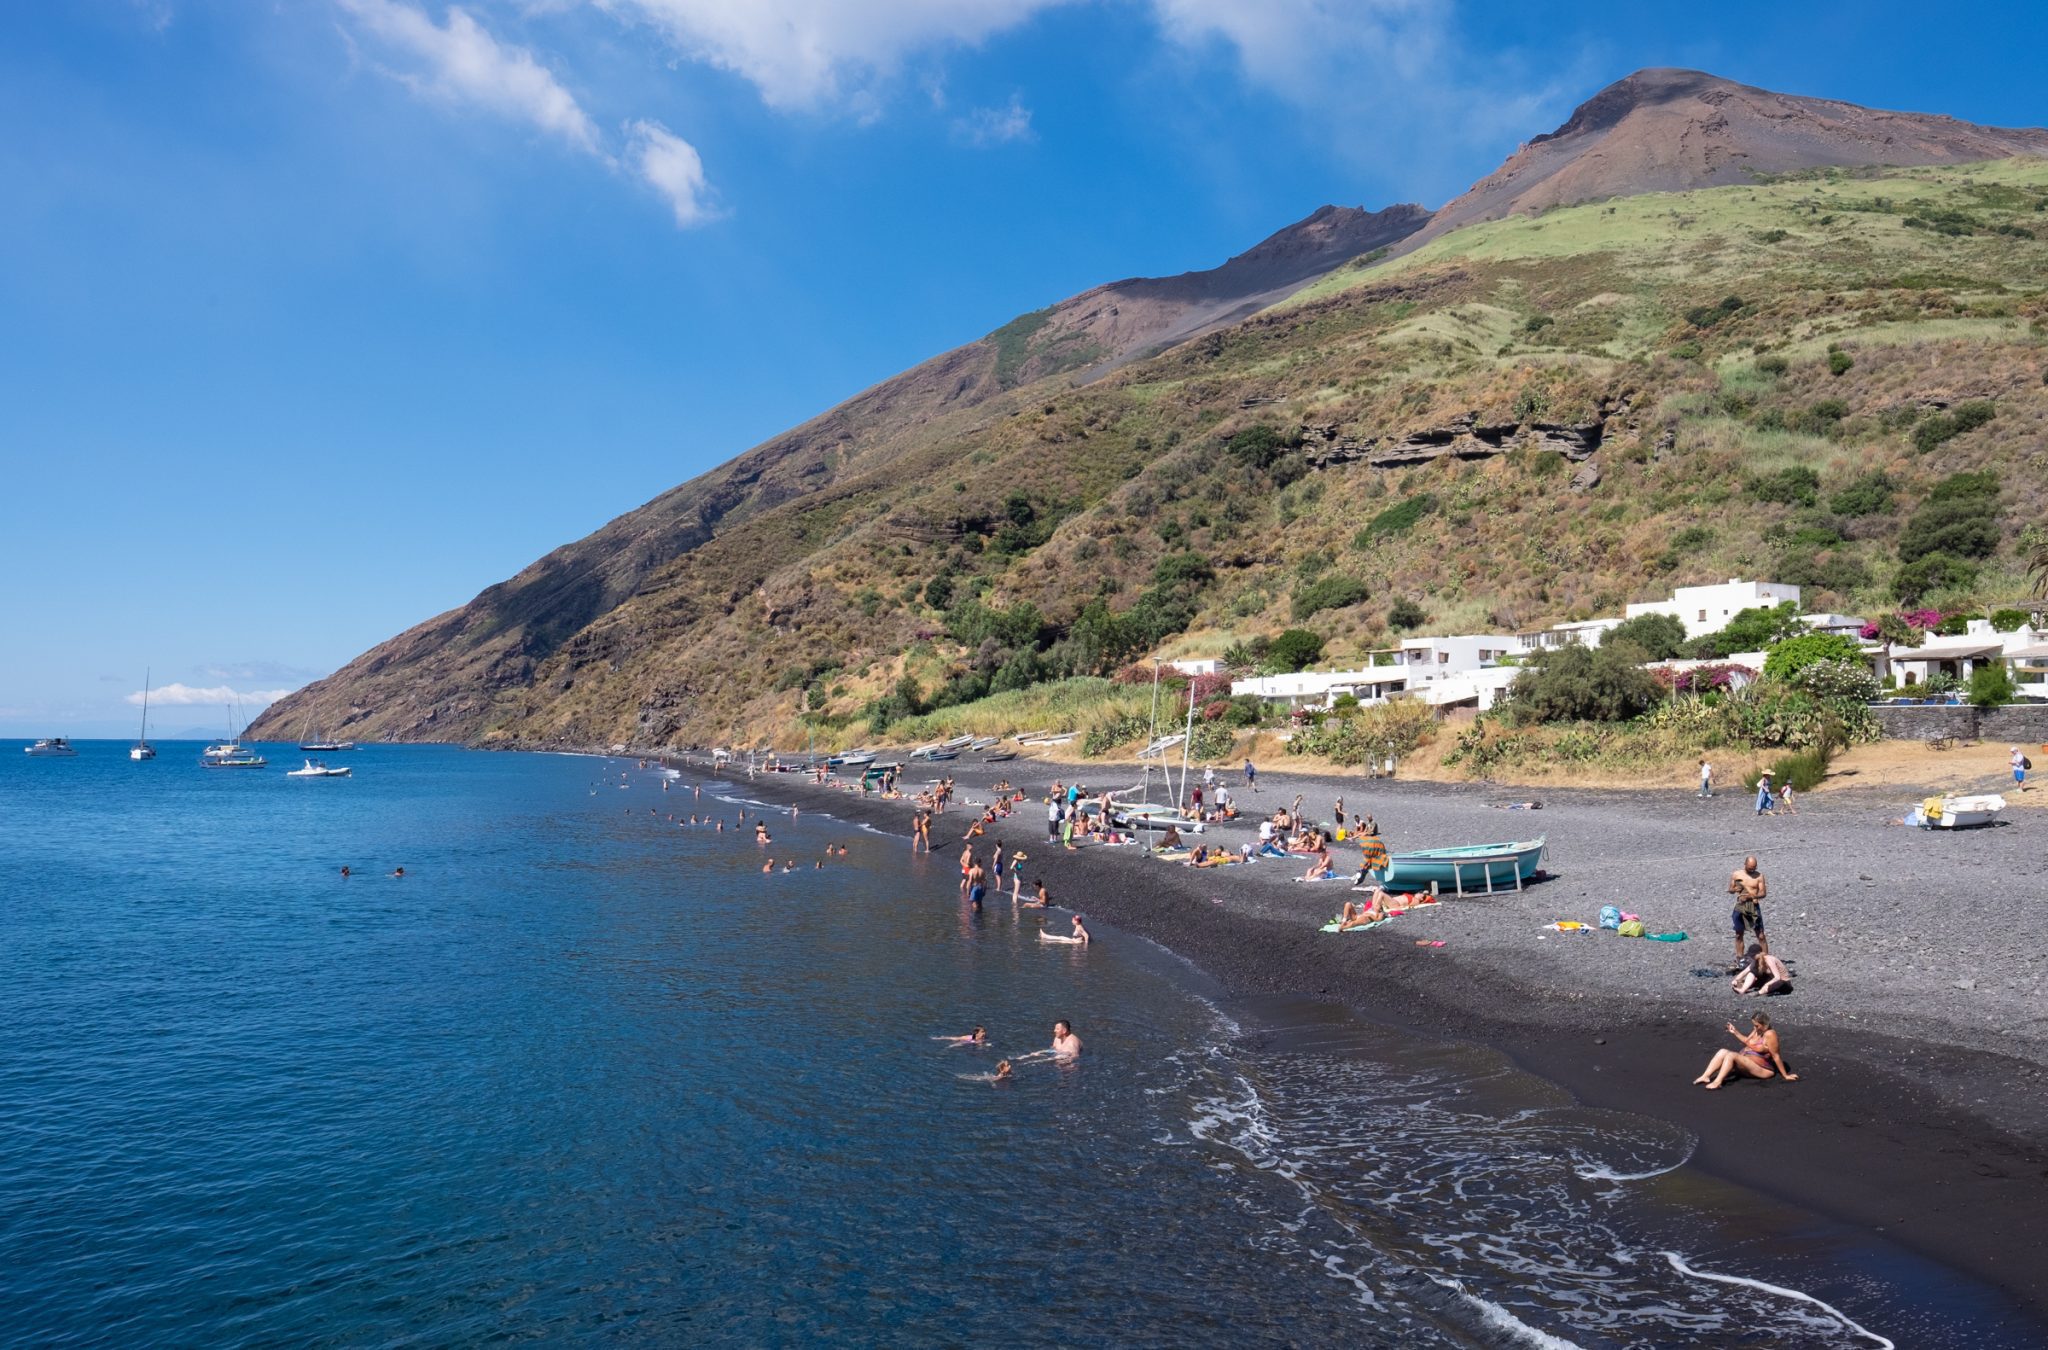 Aeolian Islands, Sicily: A Detailed Travel Guide